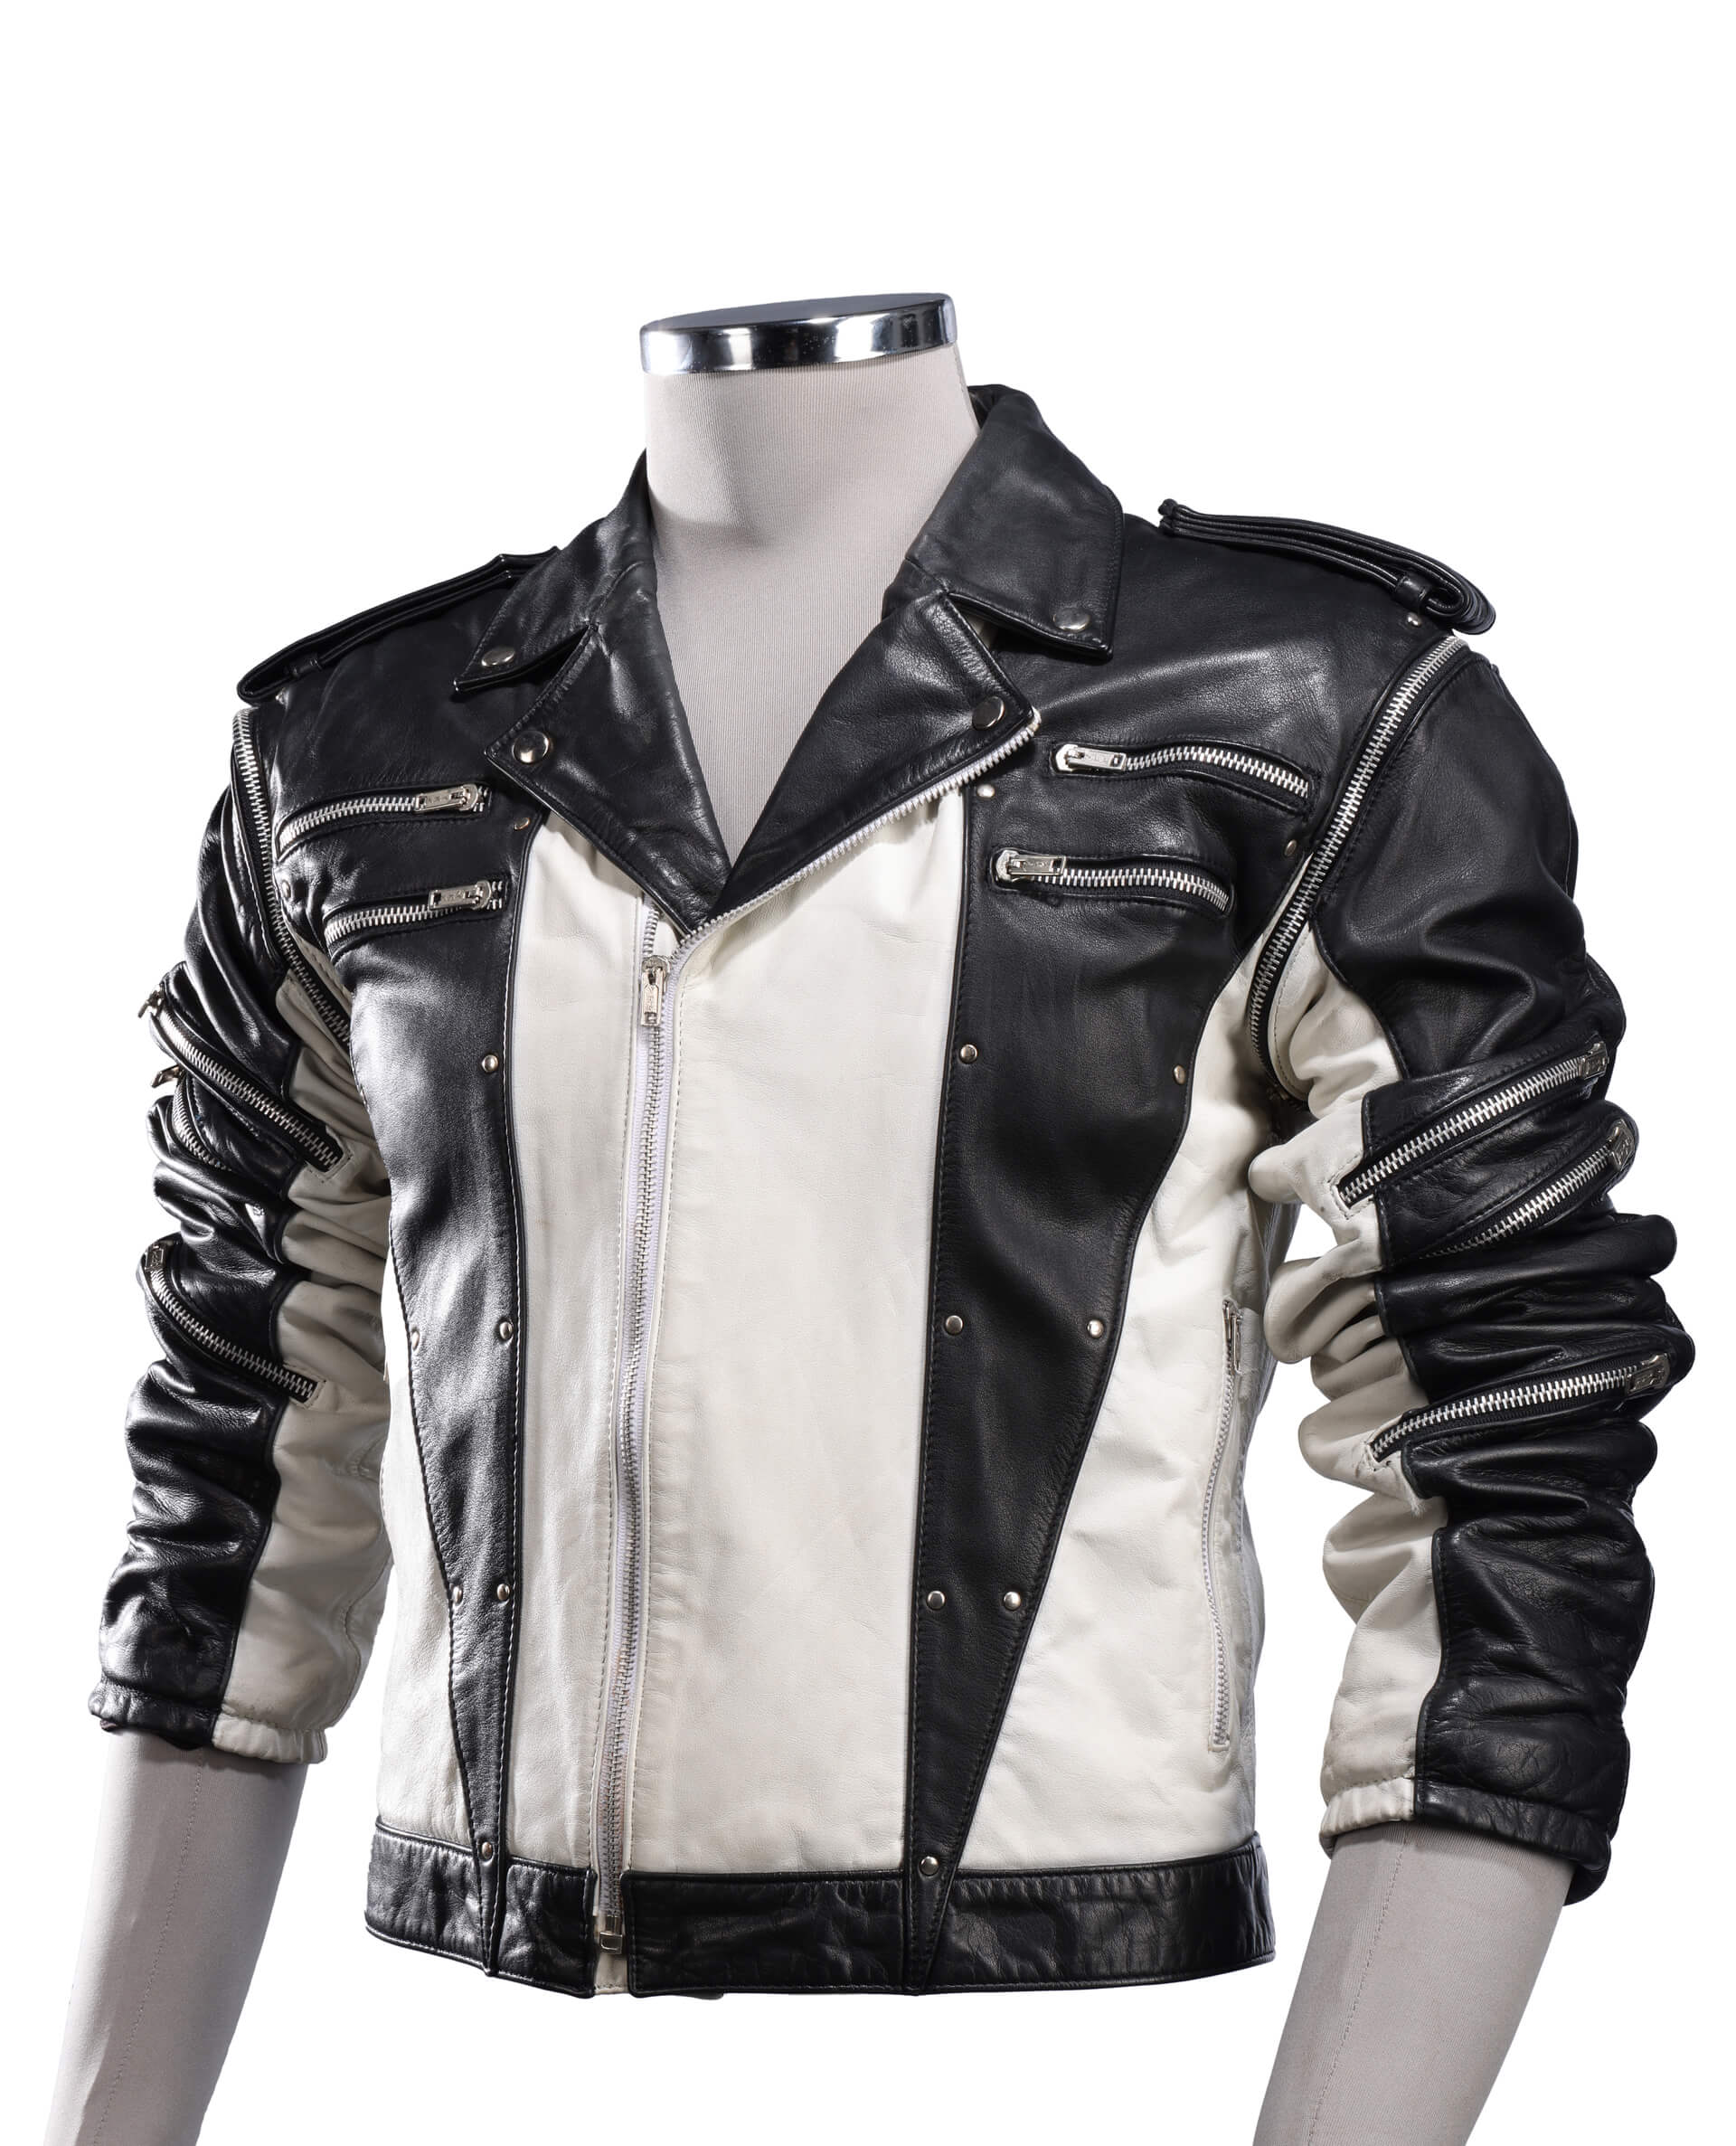 Michael Jackson’s black and white leather jacket from the famous 1984 Pepsi commercial